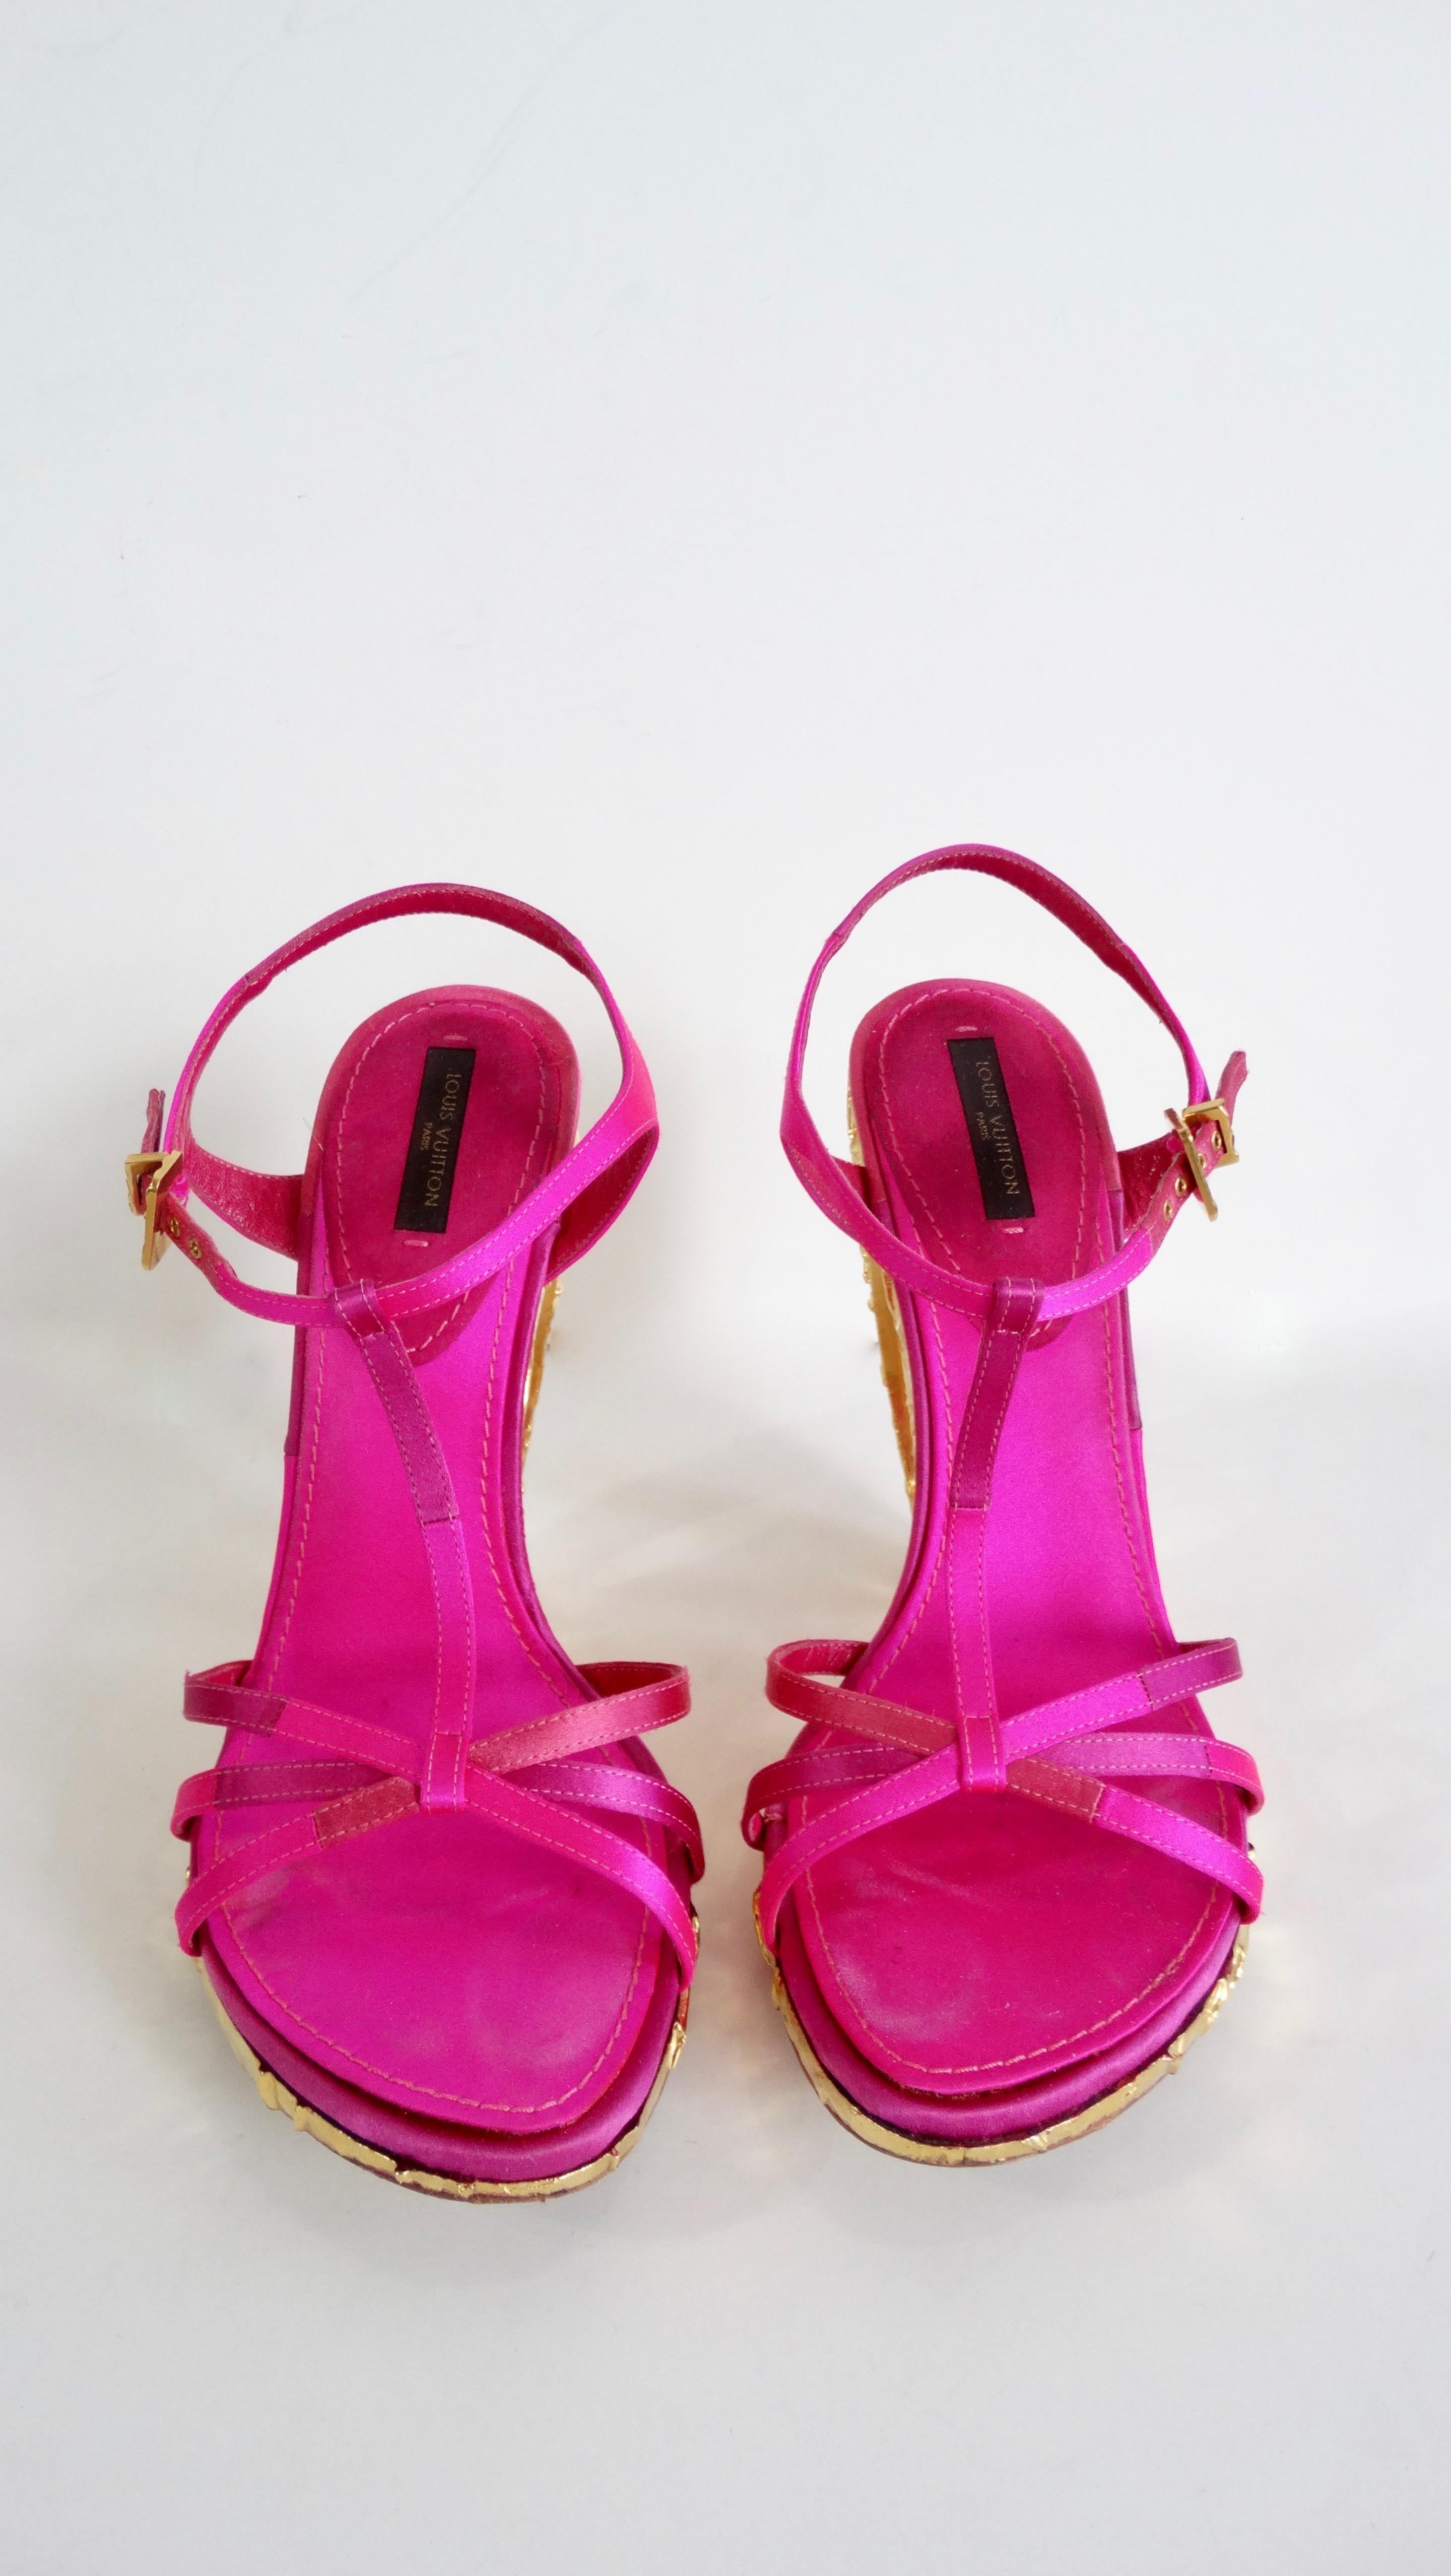 Louis Vuitton 2000s Fuchsia Satin Pumps With Textured Gold Heels In Good Condition For Sale In Scottsdale, AZ